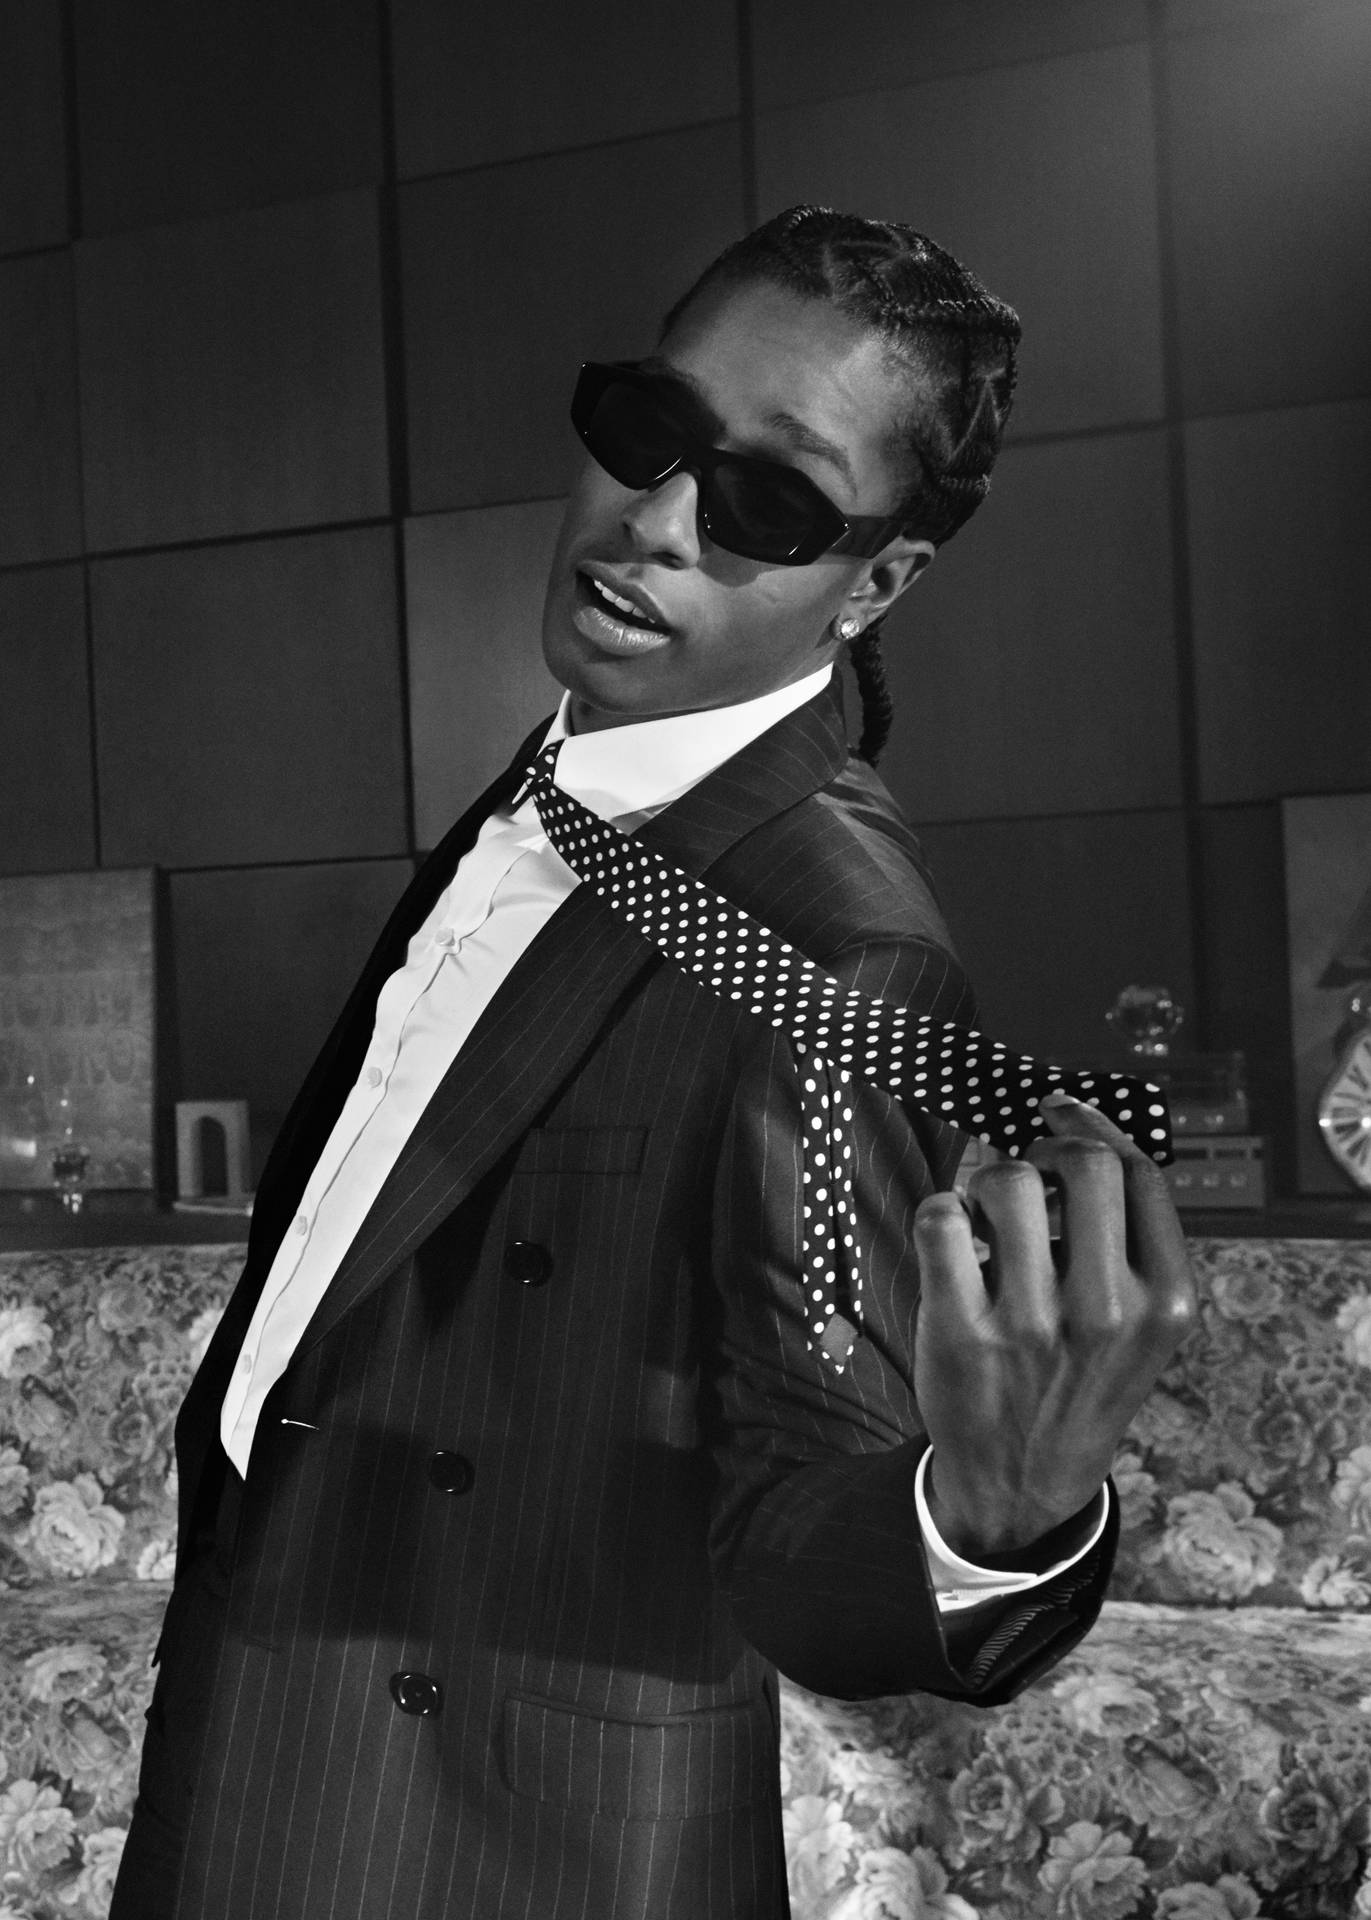 Asap Rocky In Black Suit Background